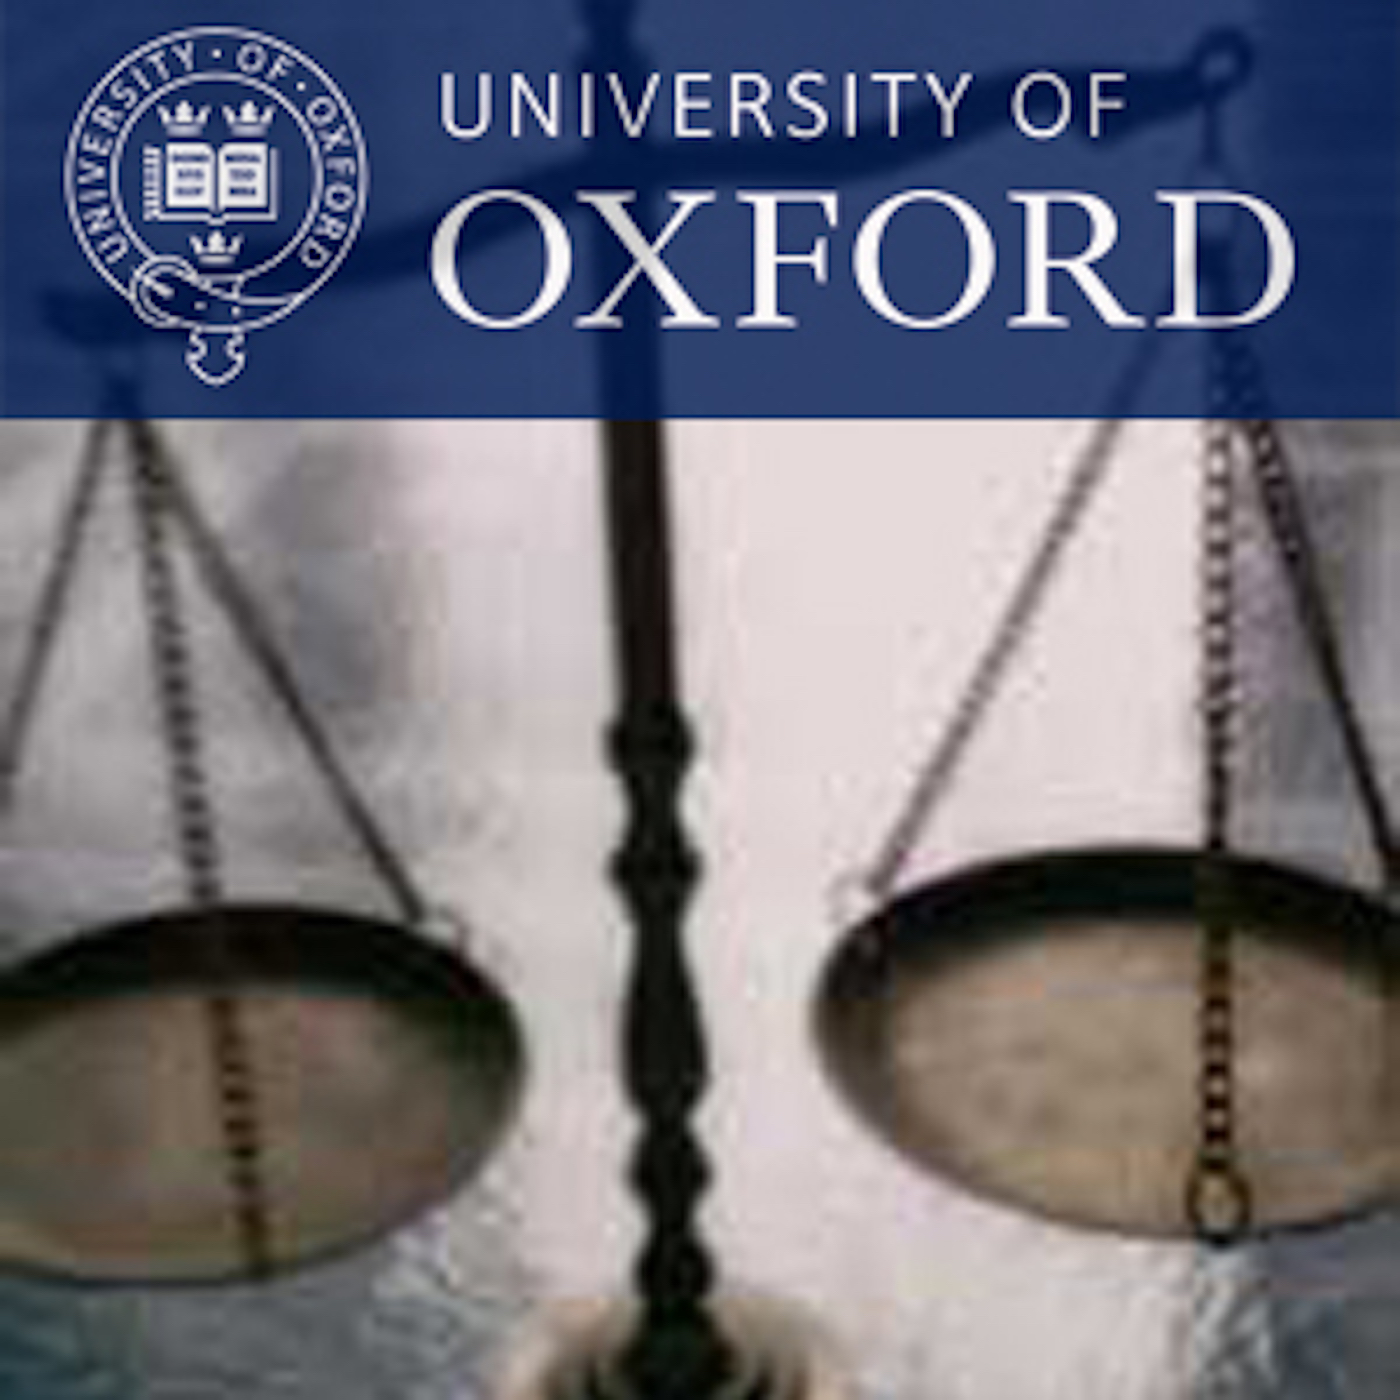 Oxford Transitional Justice Research Conference - Justice and Self-Determination in West Papua